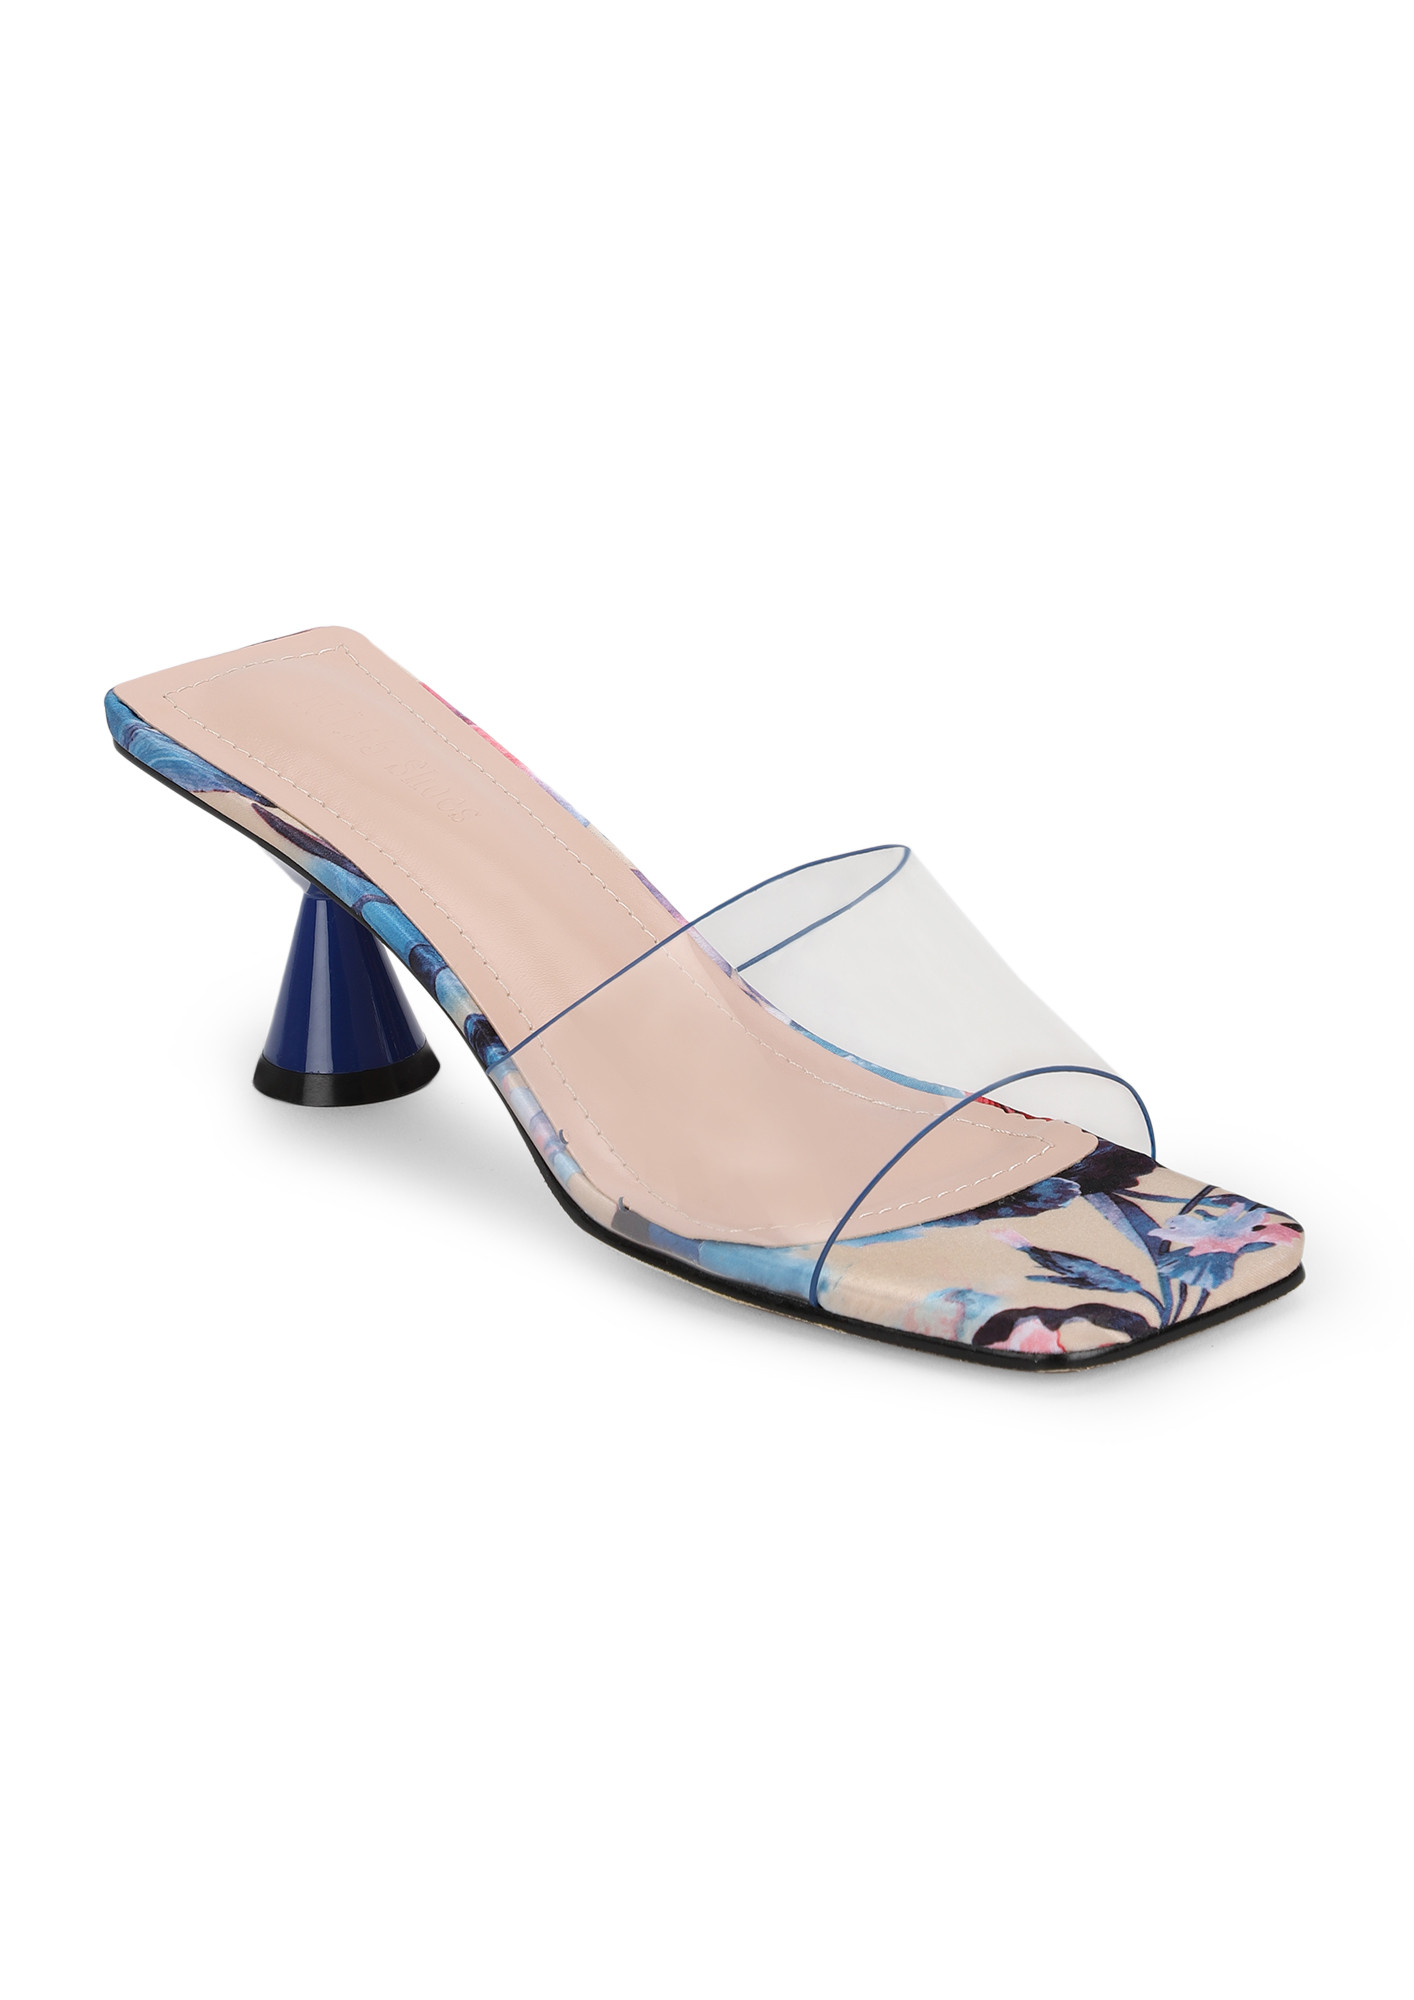 SHADES OF SASS BLUE HOURGLASS HEELED SANDALS